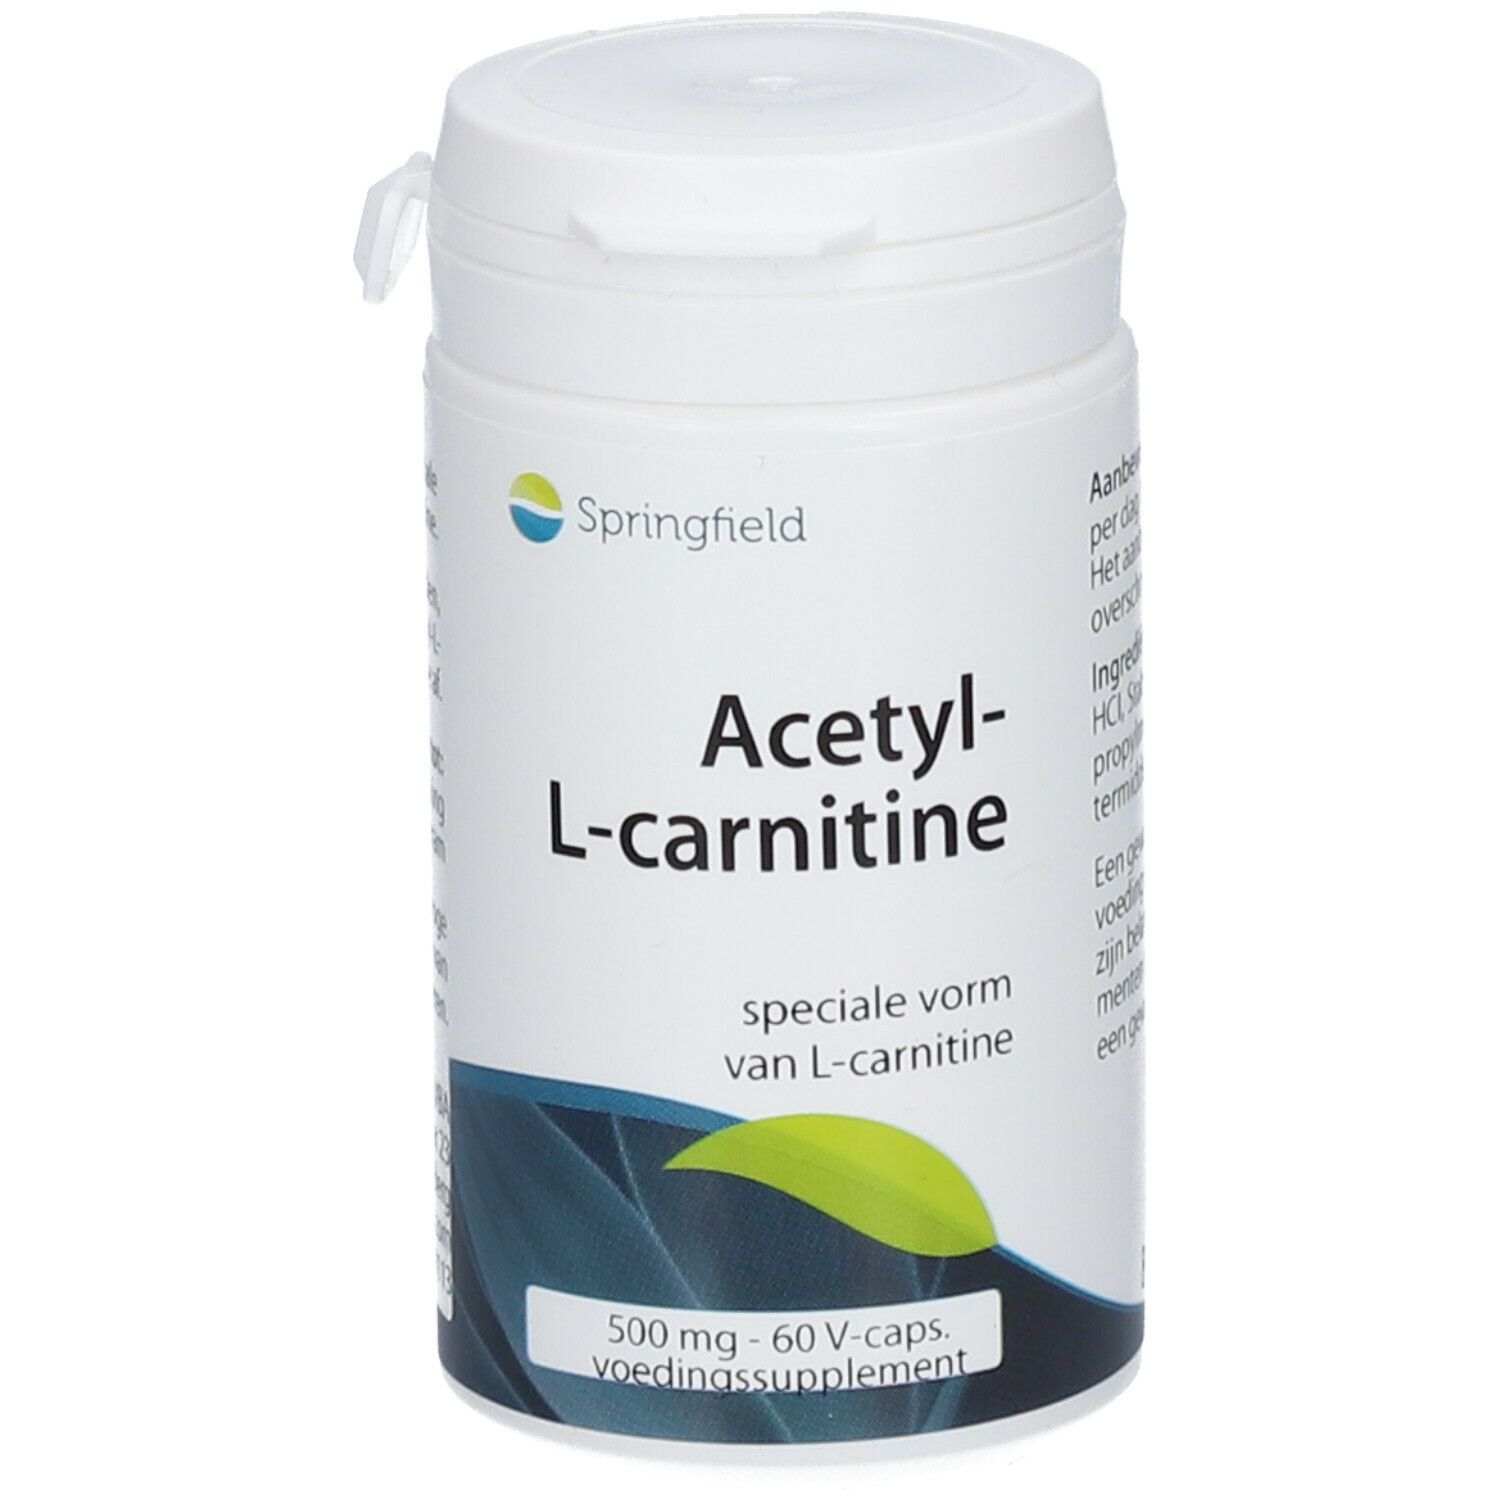 SPRINGFIELD NUTRACEUTICALS Acetyl-L-carnitine